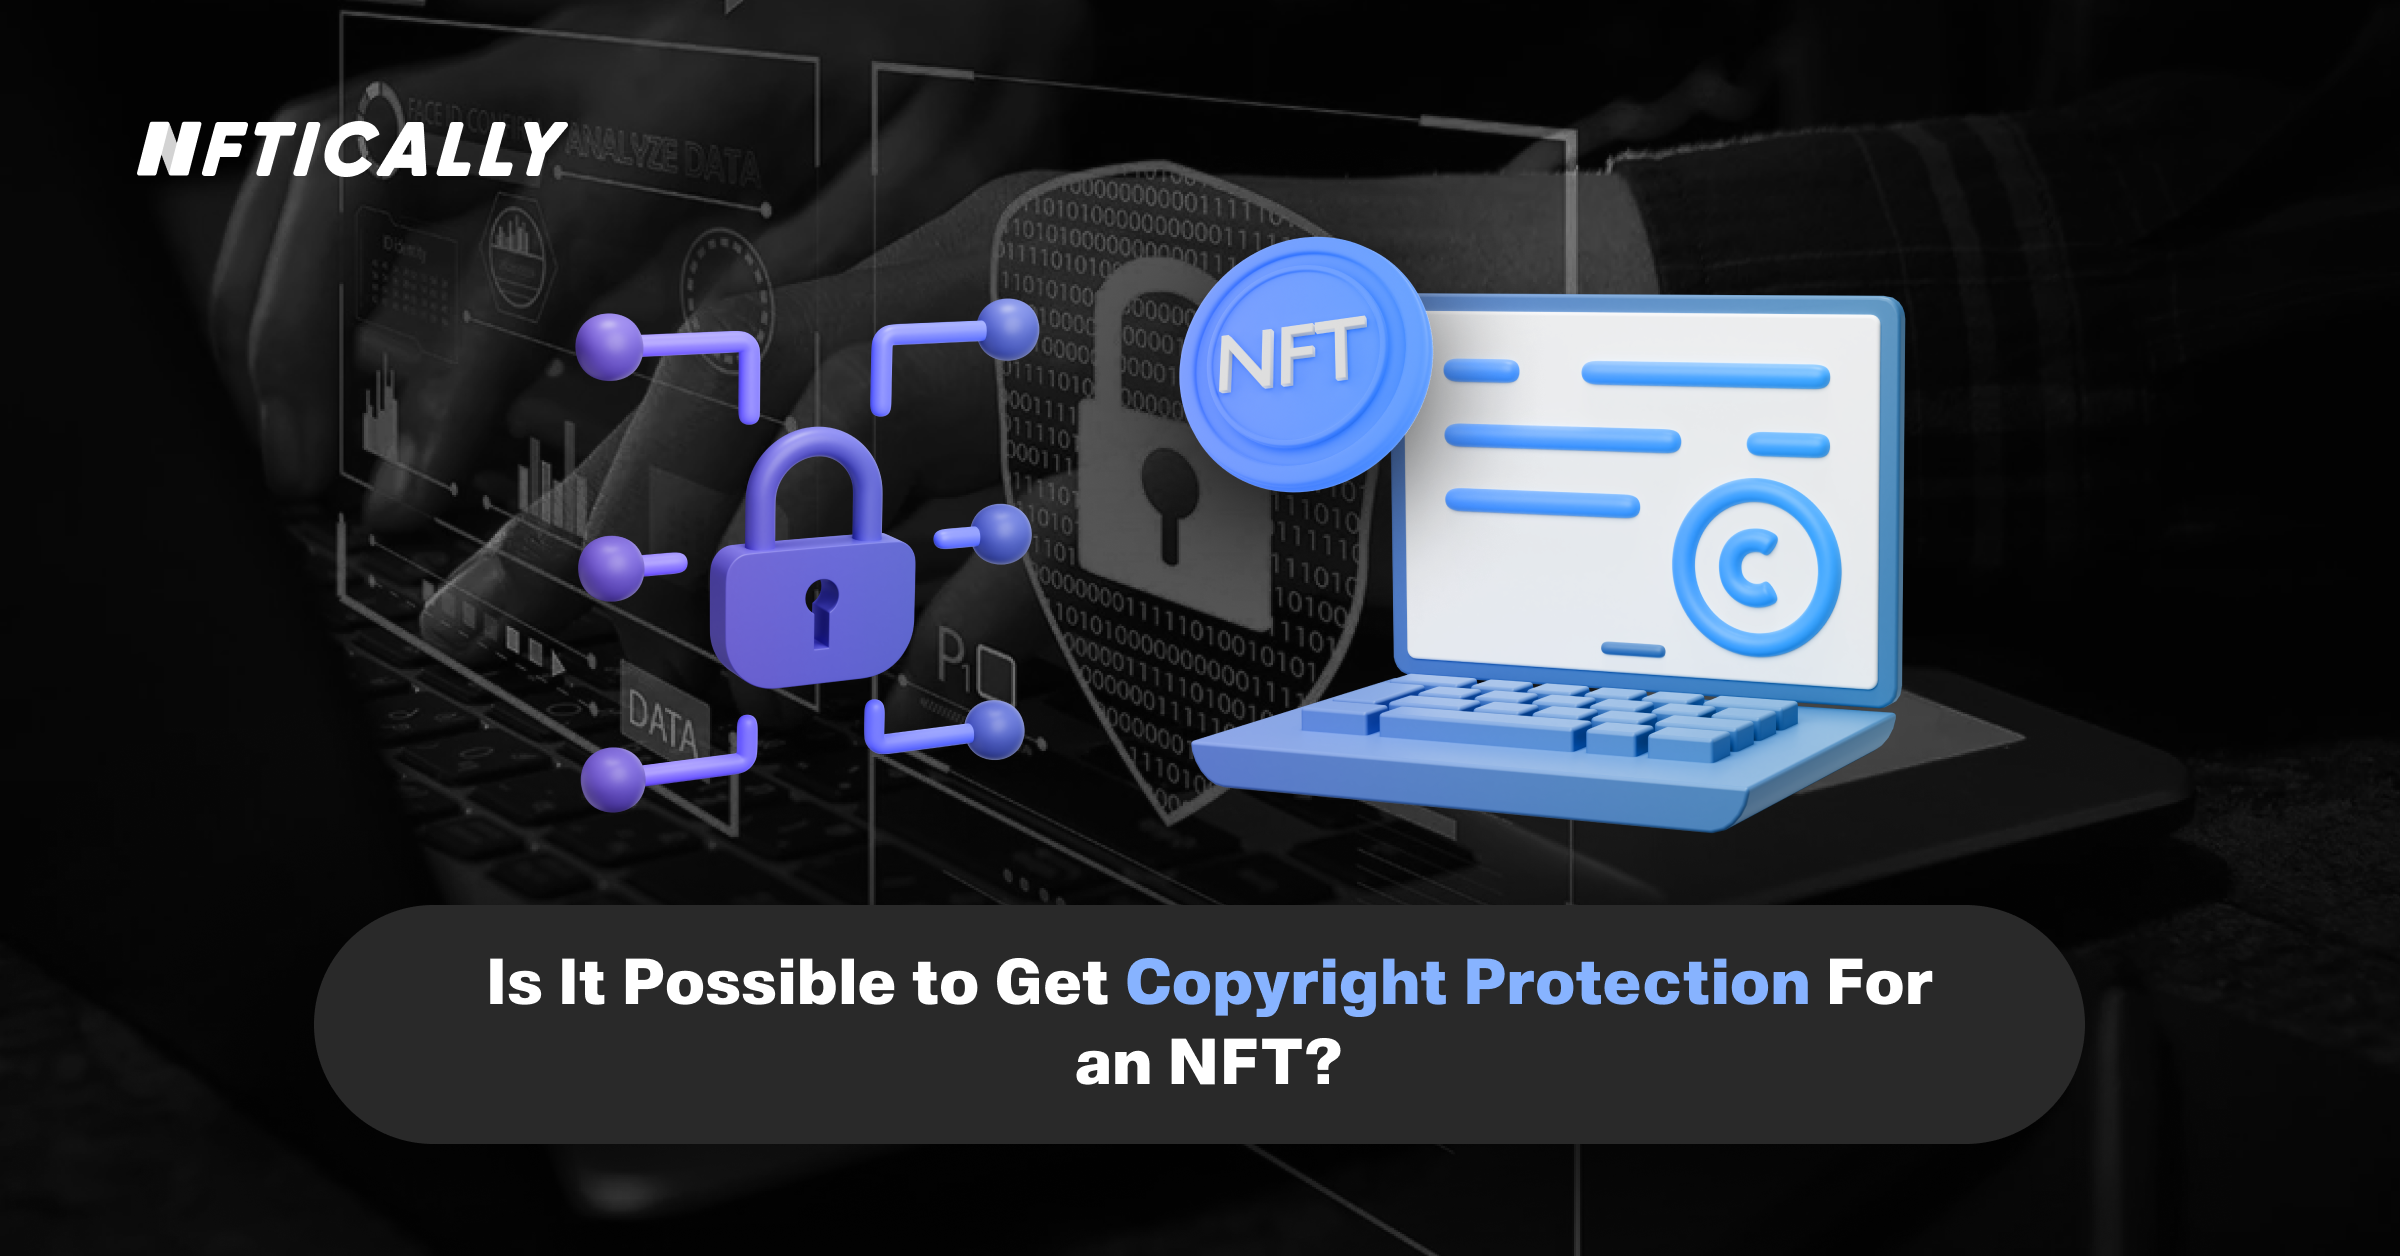 Is It Possible to Get Copyright Protection For an NFT?